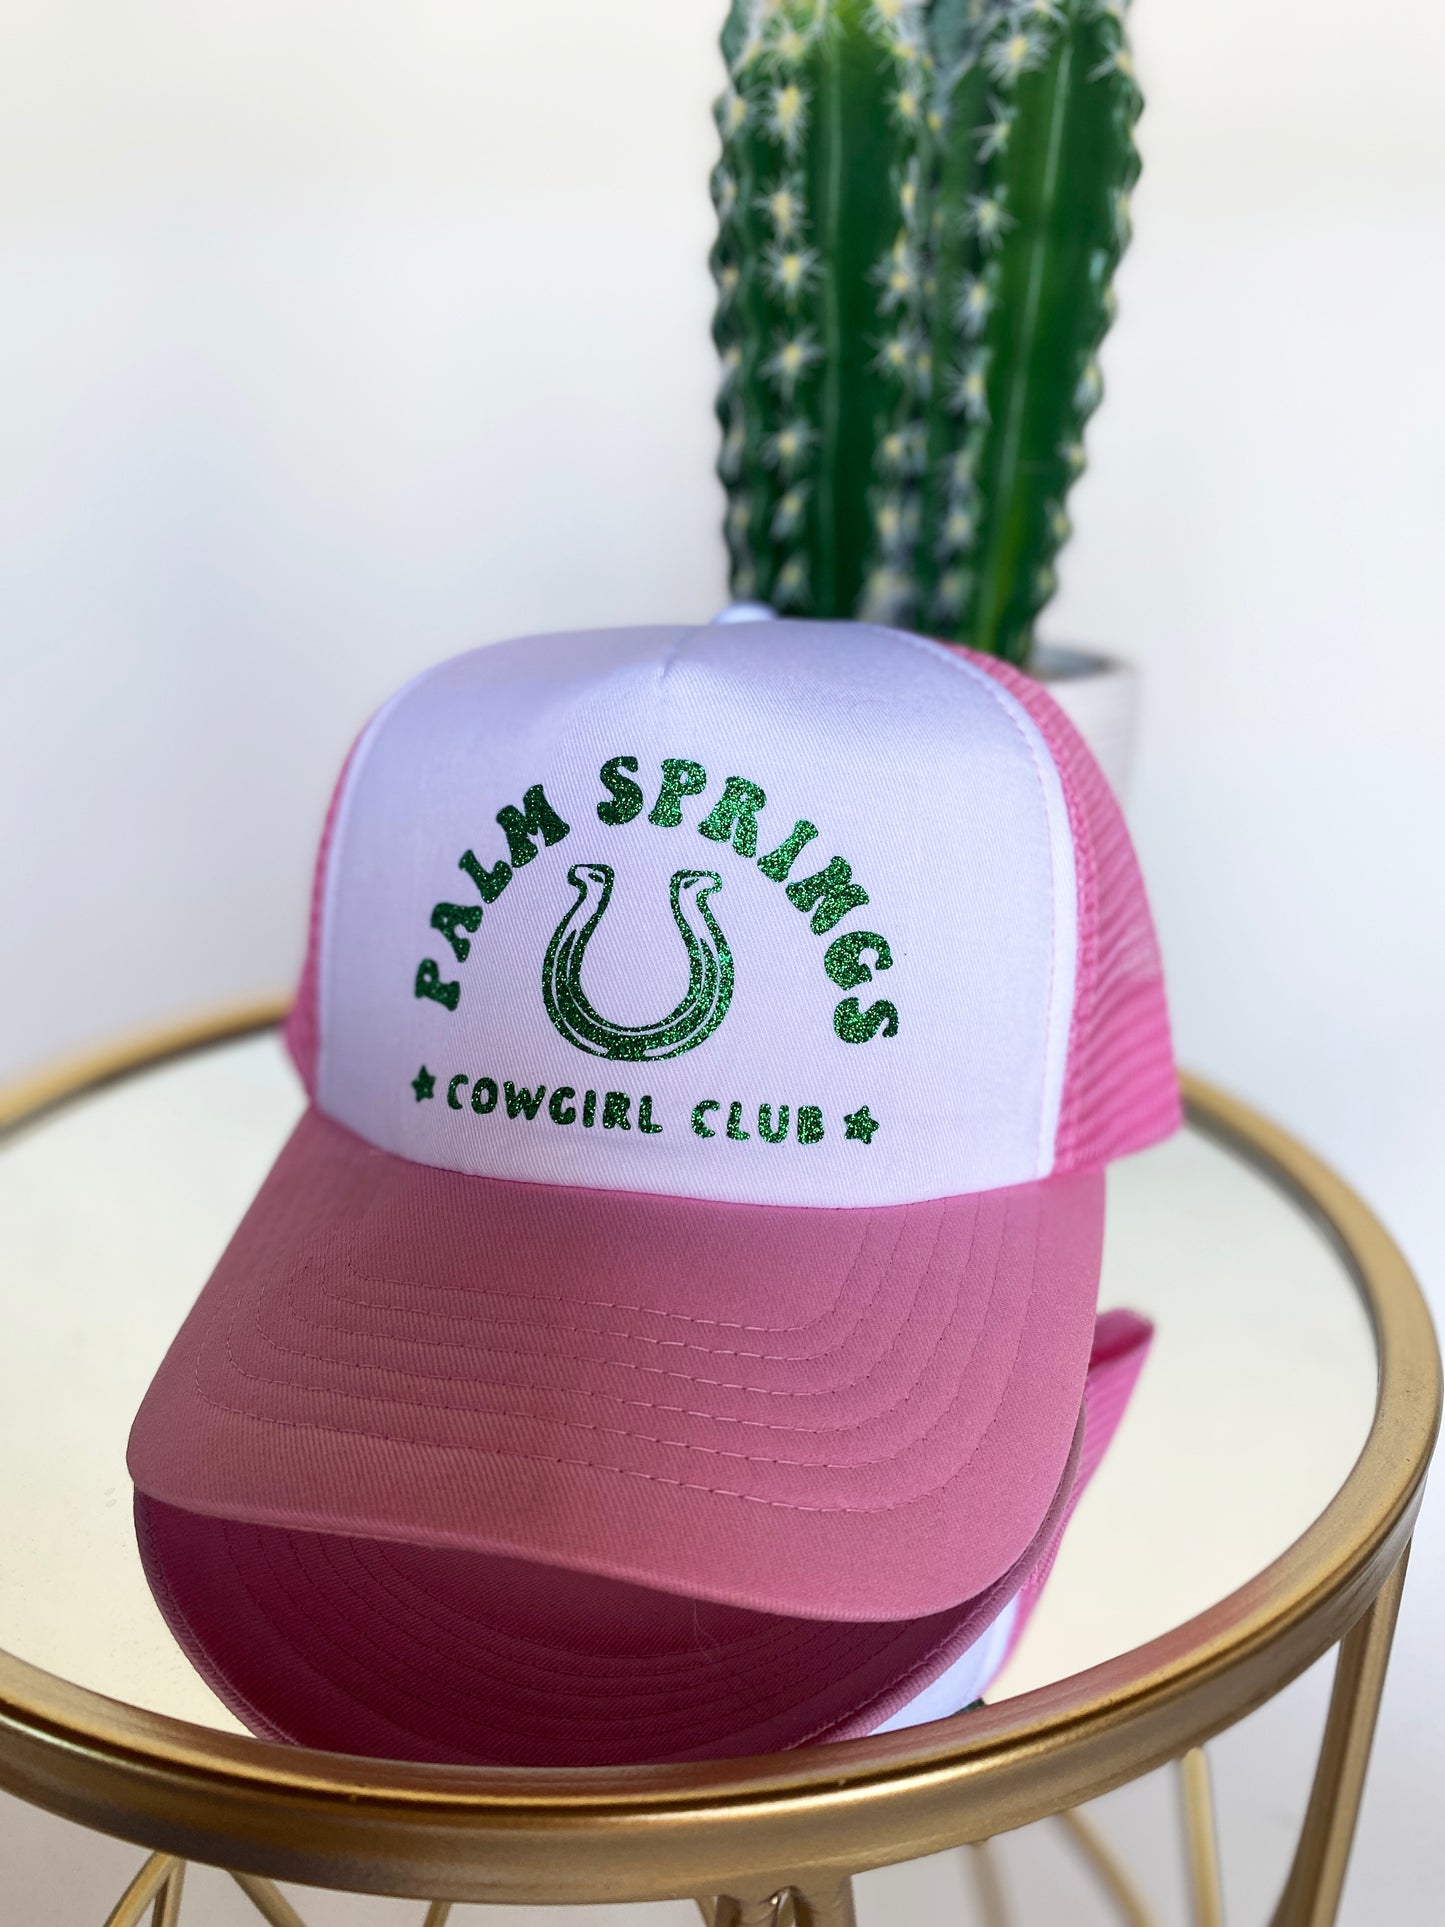 Palm Springs Cowgirl Club Trucker Hat by Ali Dee - Pink and White